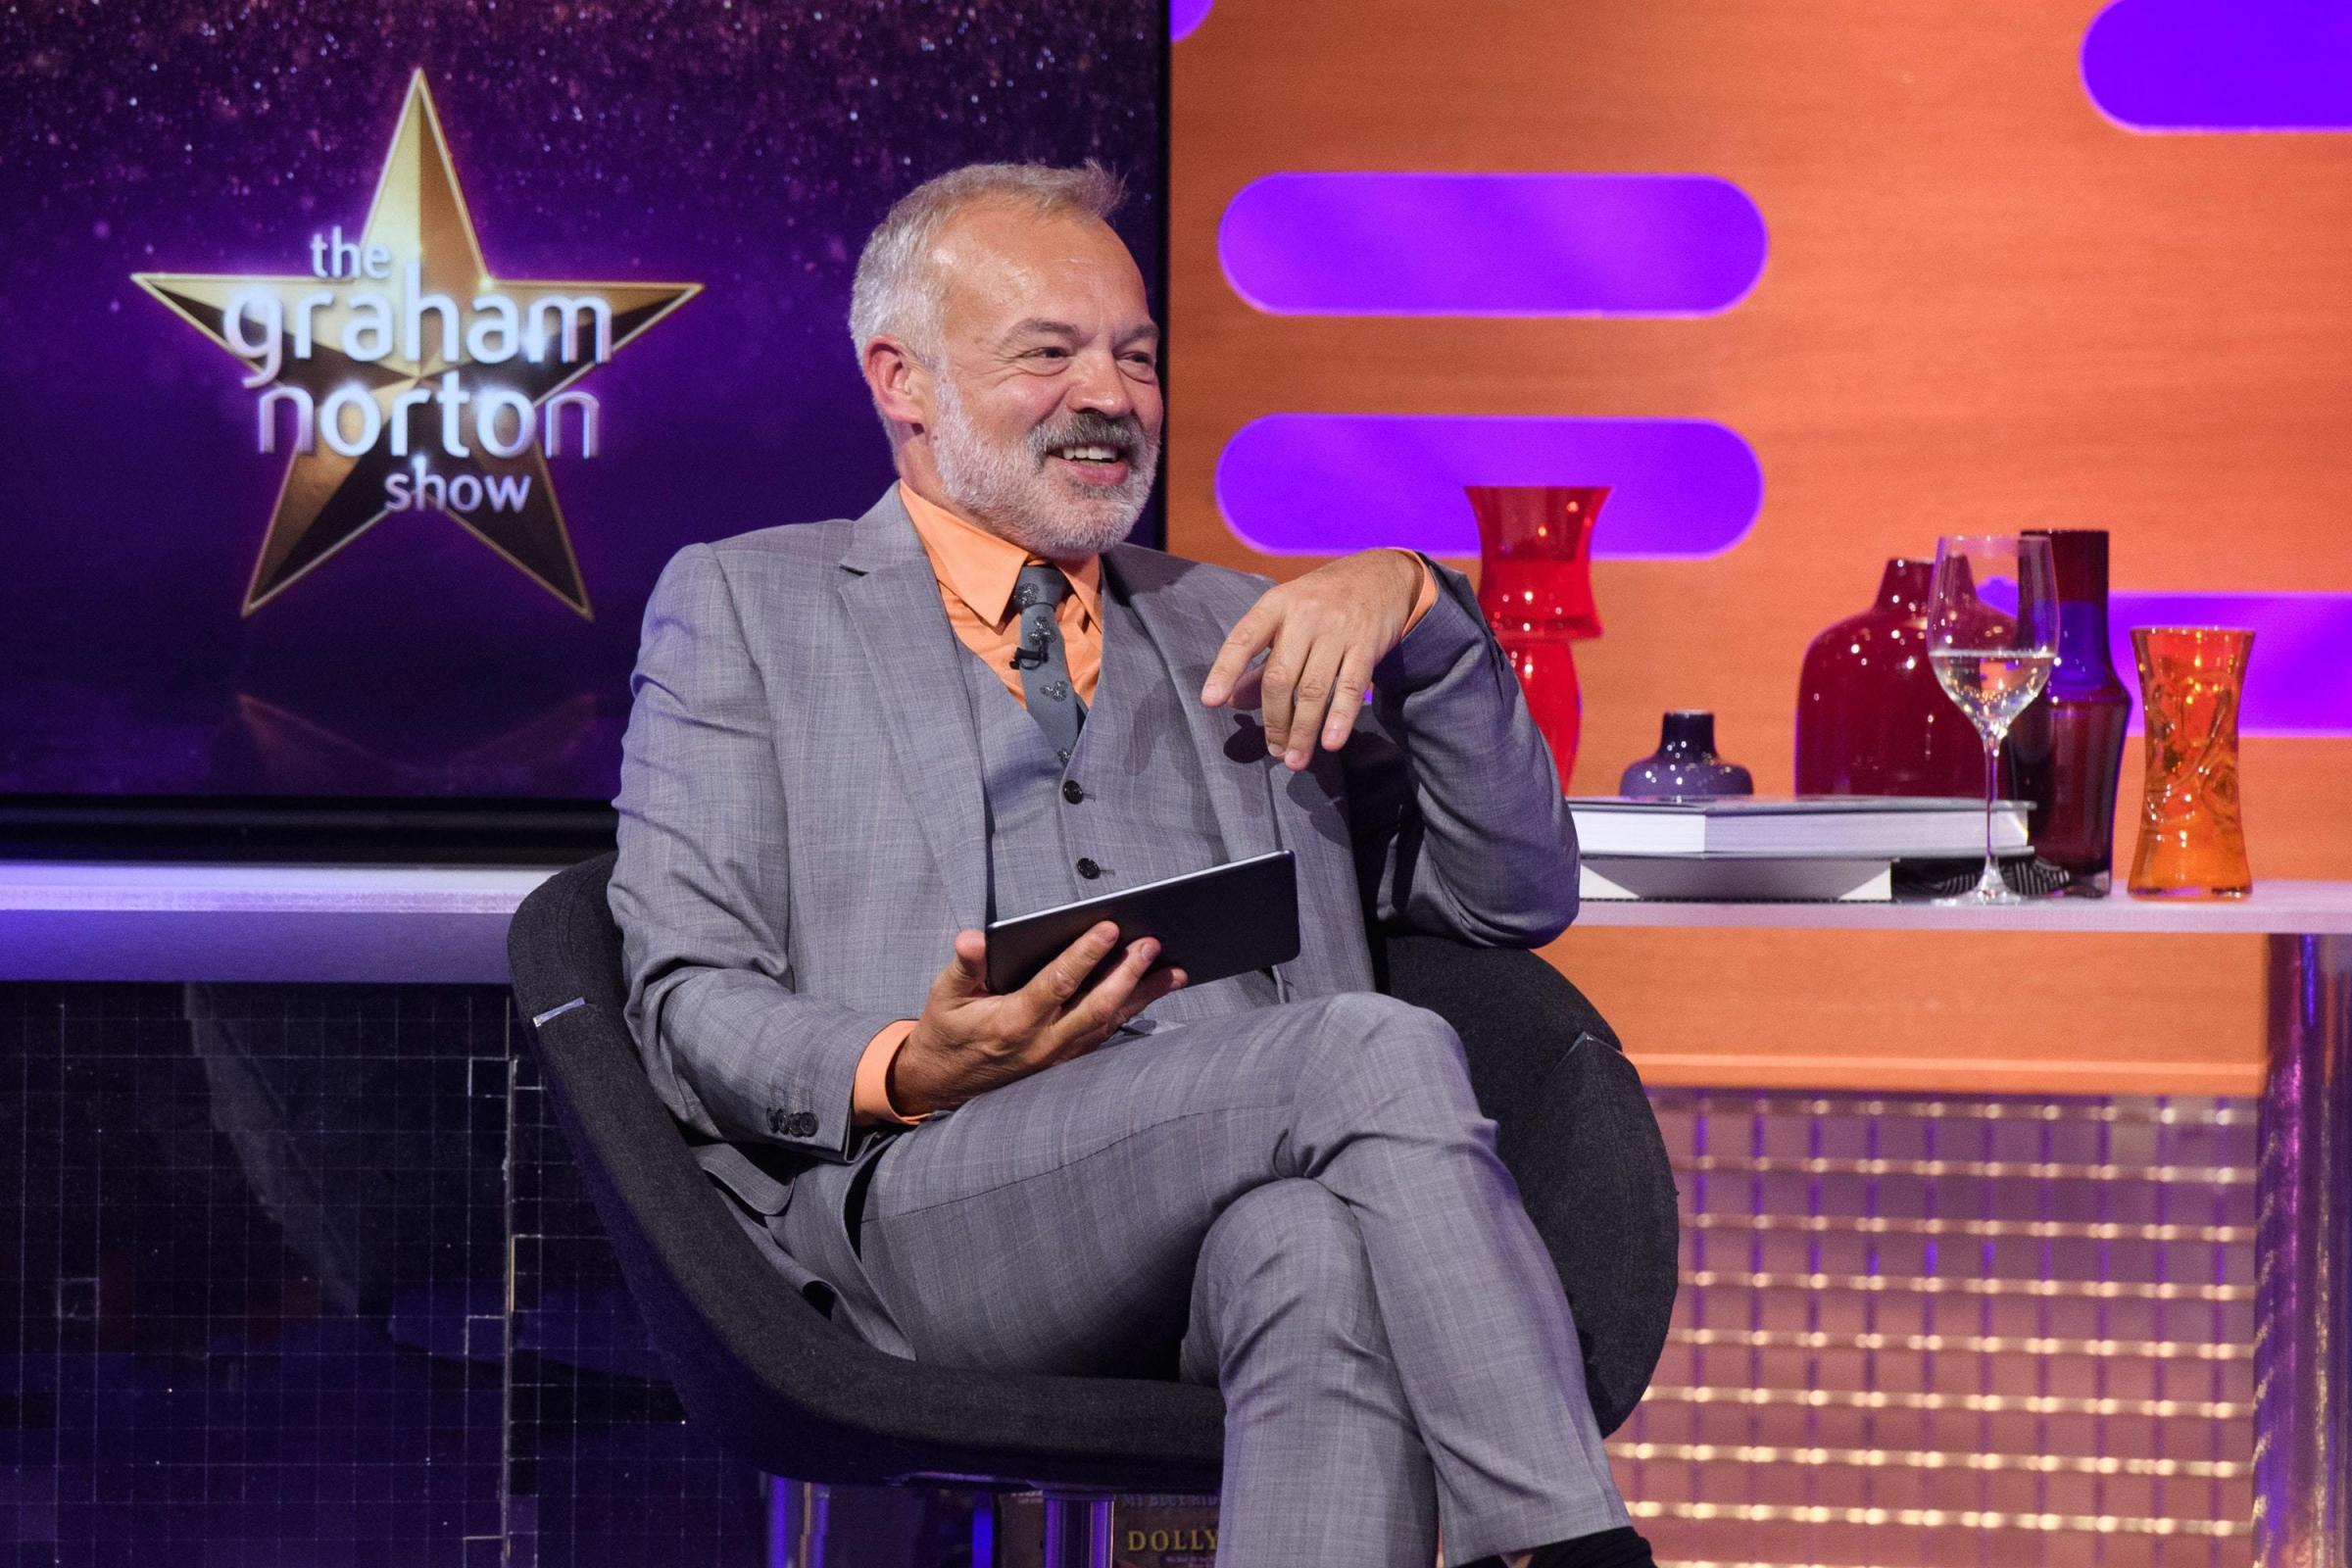 Graham Norton has also been nominated for an award 